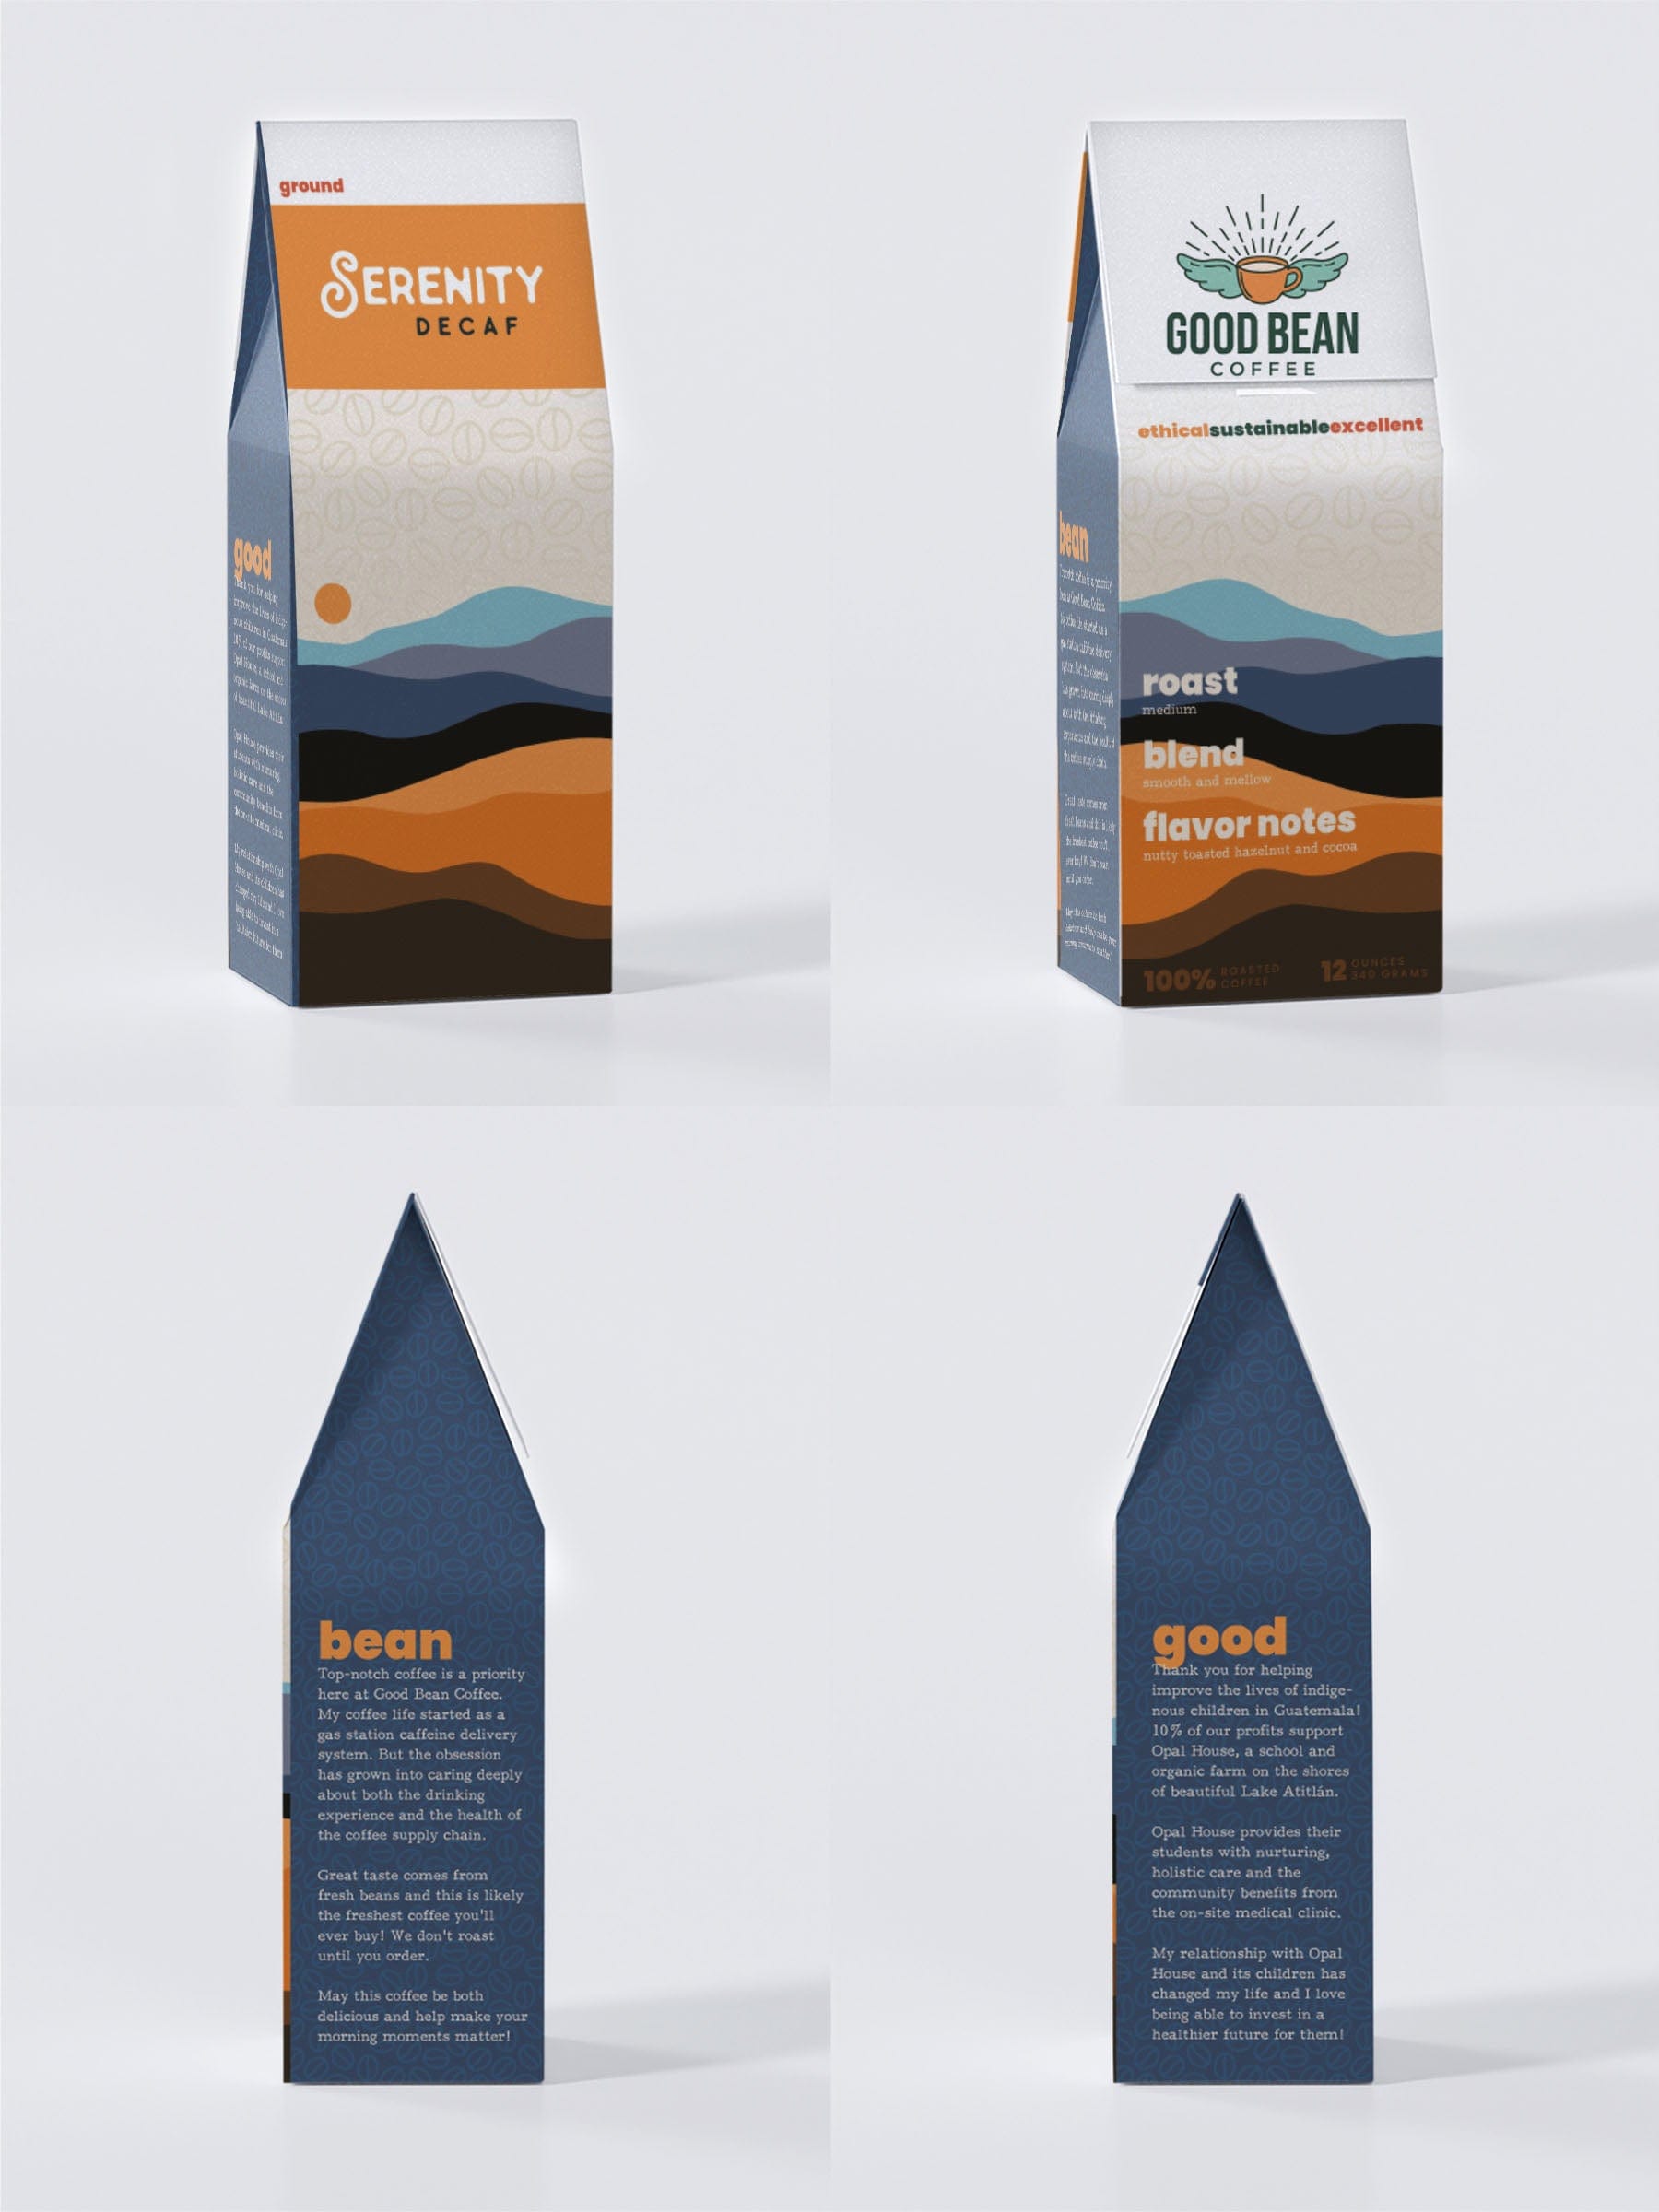 Good Bean Gifts Serenity - Decaf